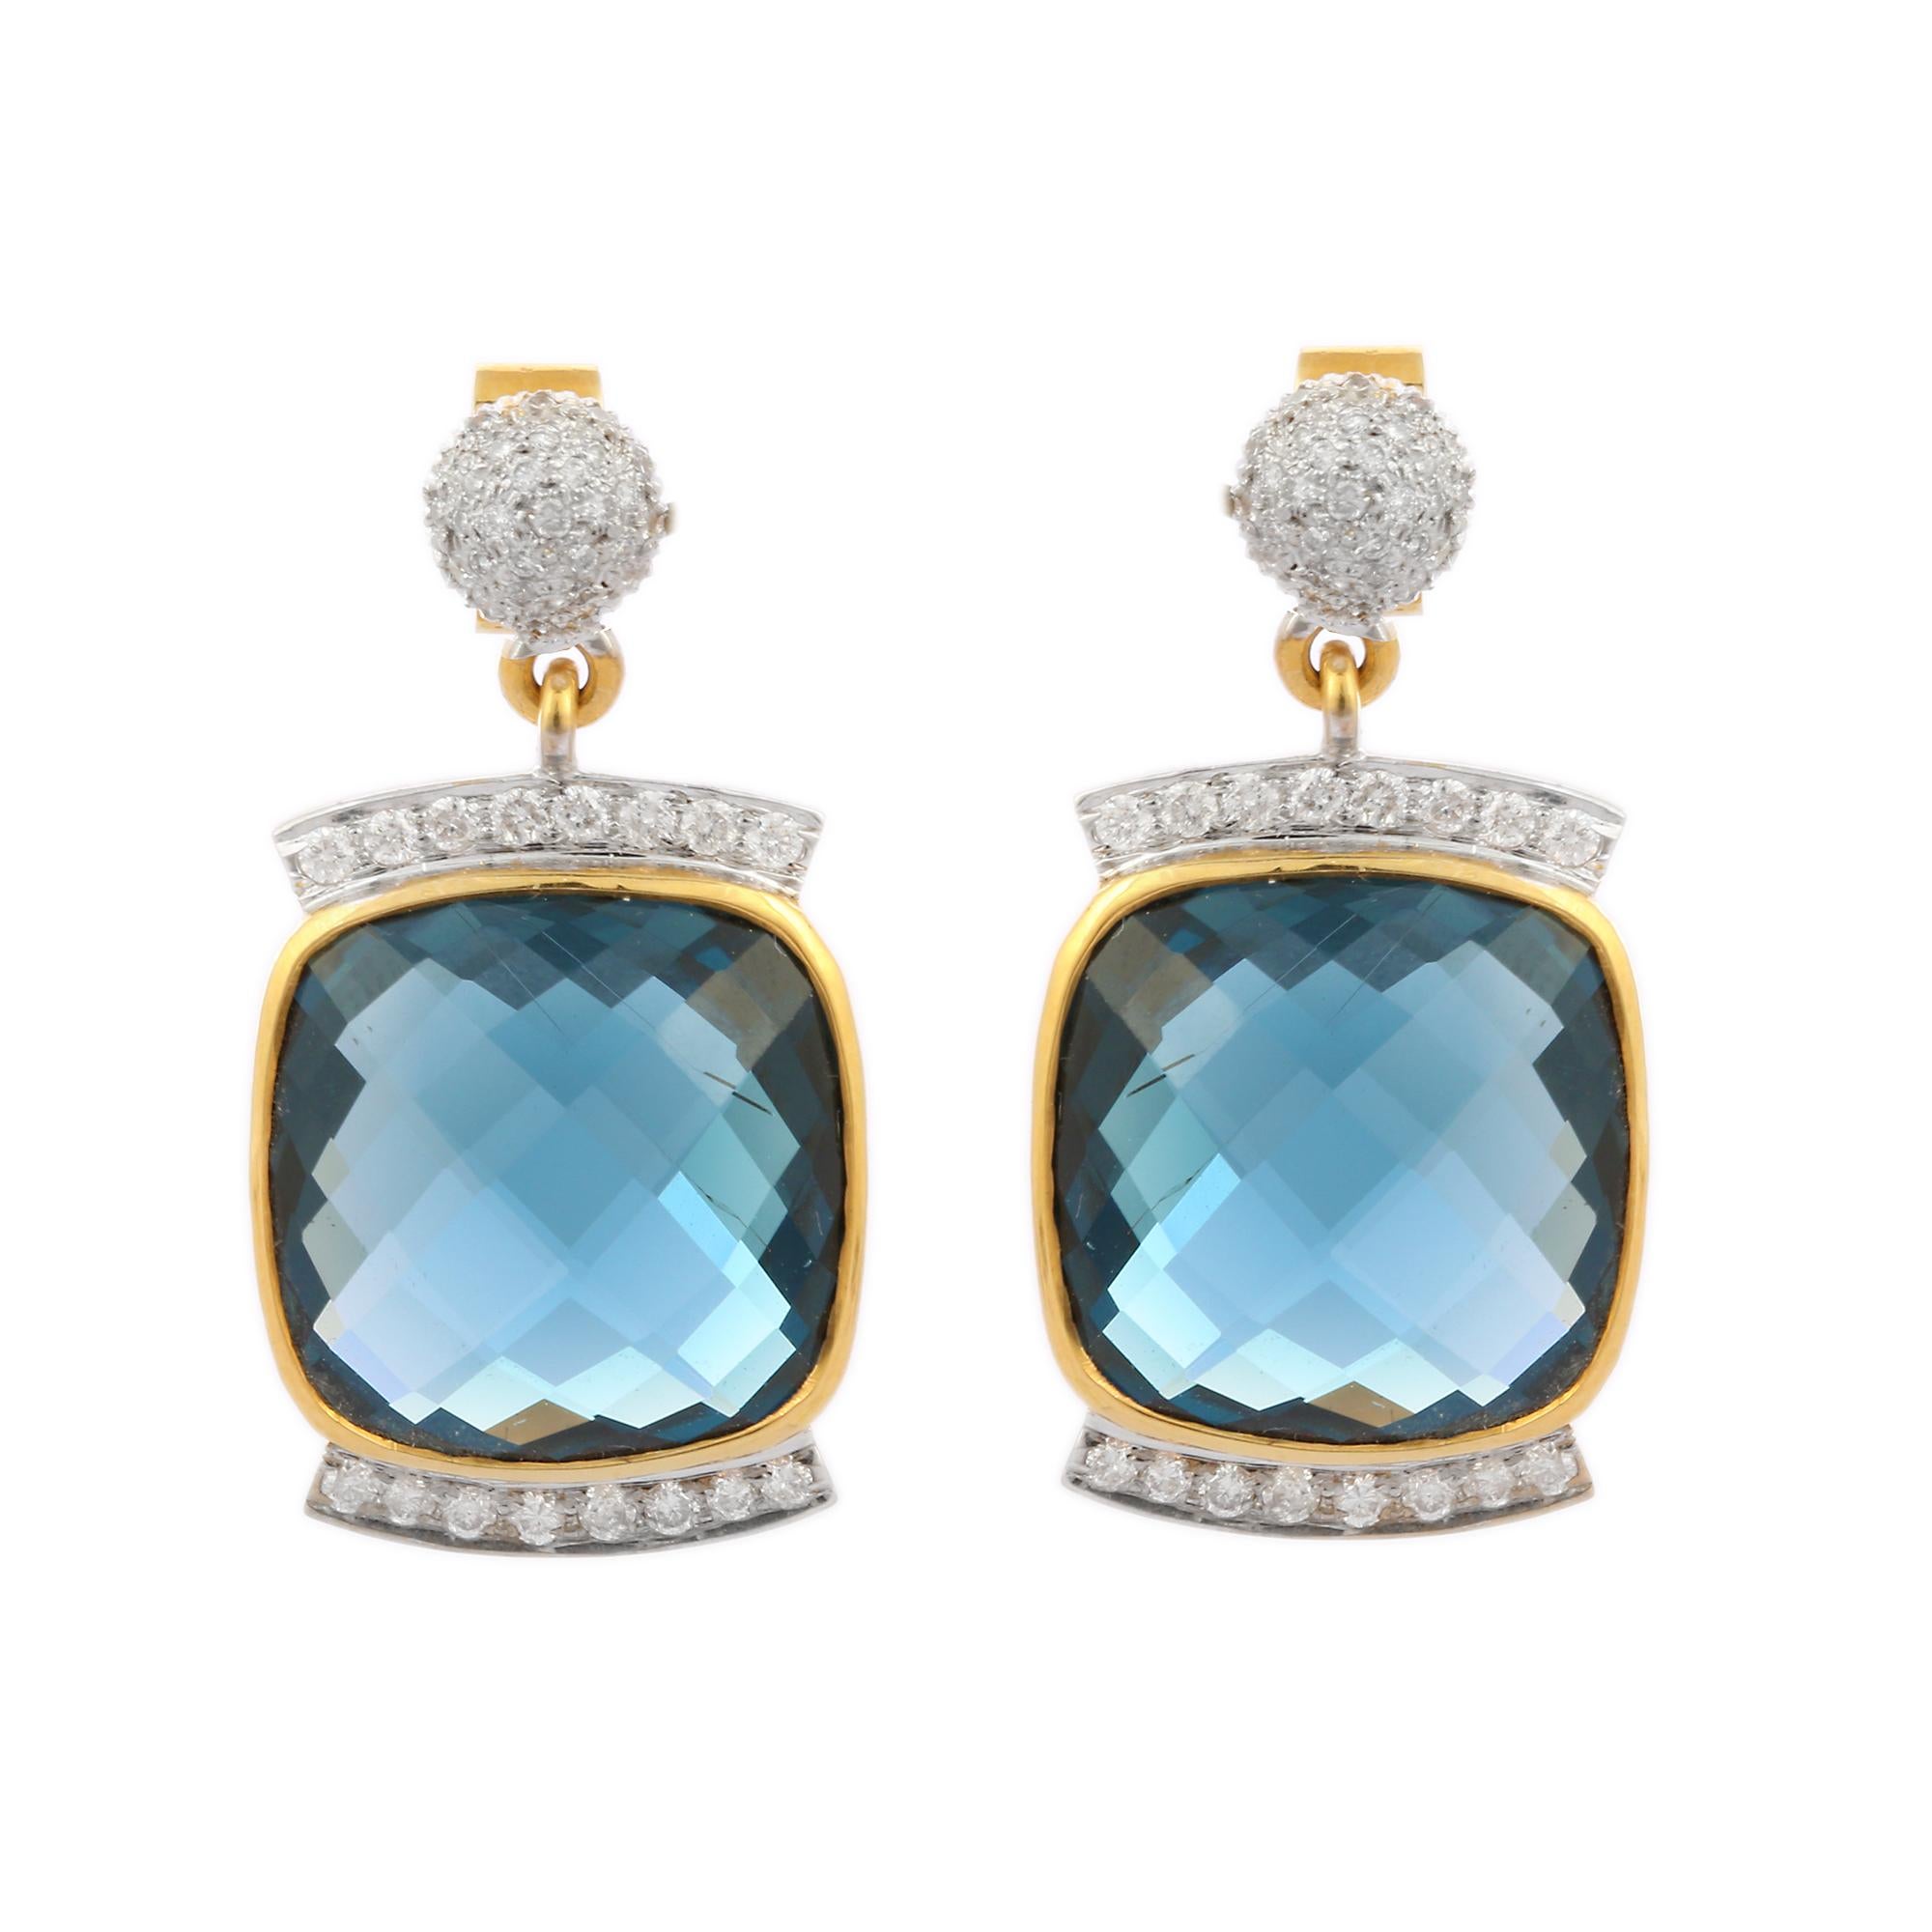 22.8 Ct Dark Blue Topaz Dangle Earrings with Diamonds Set in 14K Yellow Gold In New Condition For Sale In Houston, TX